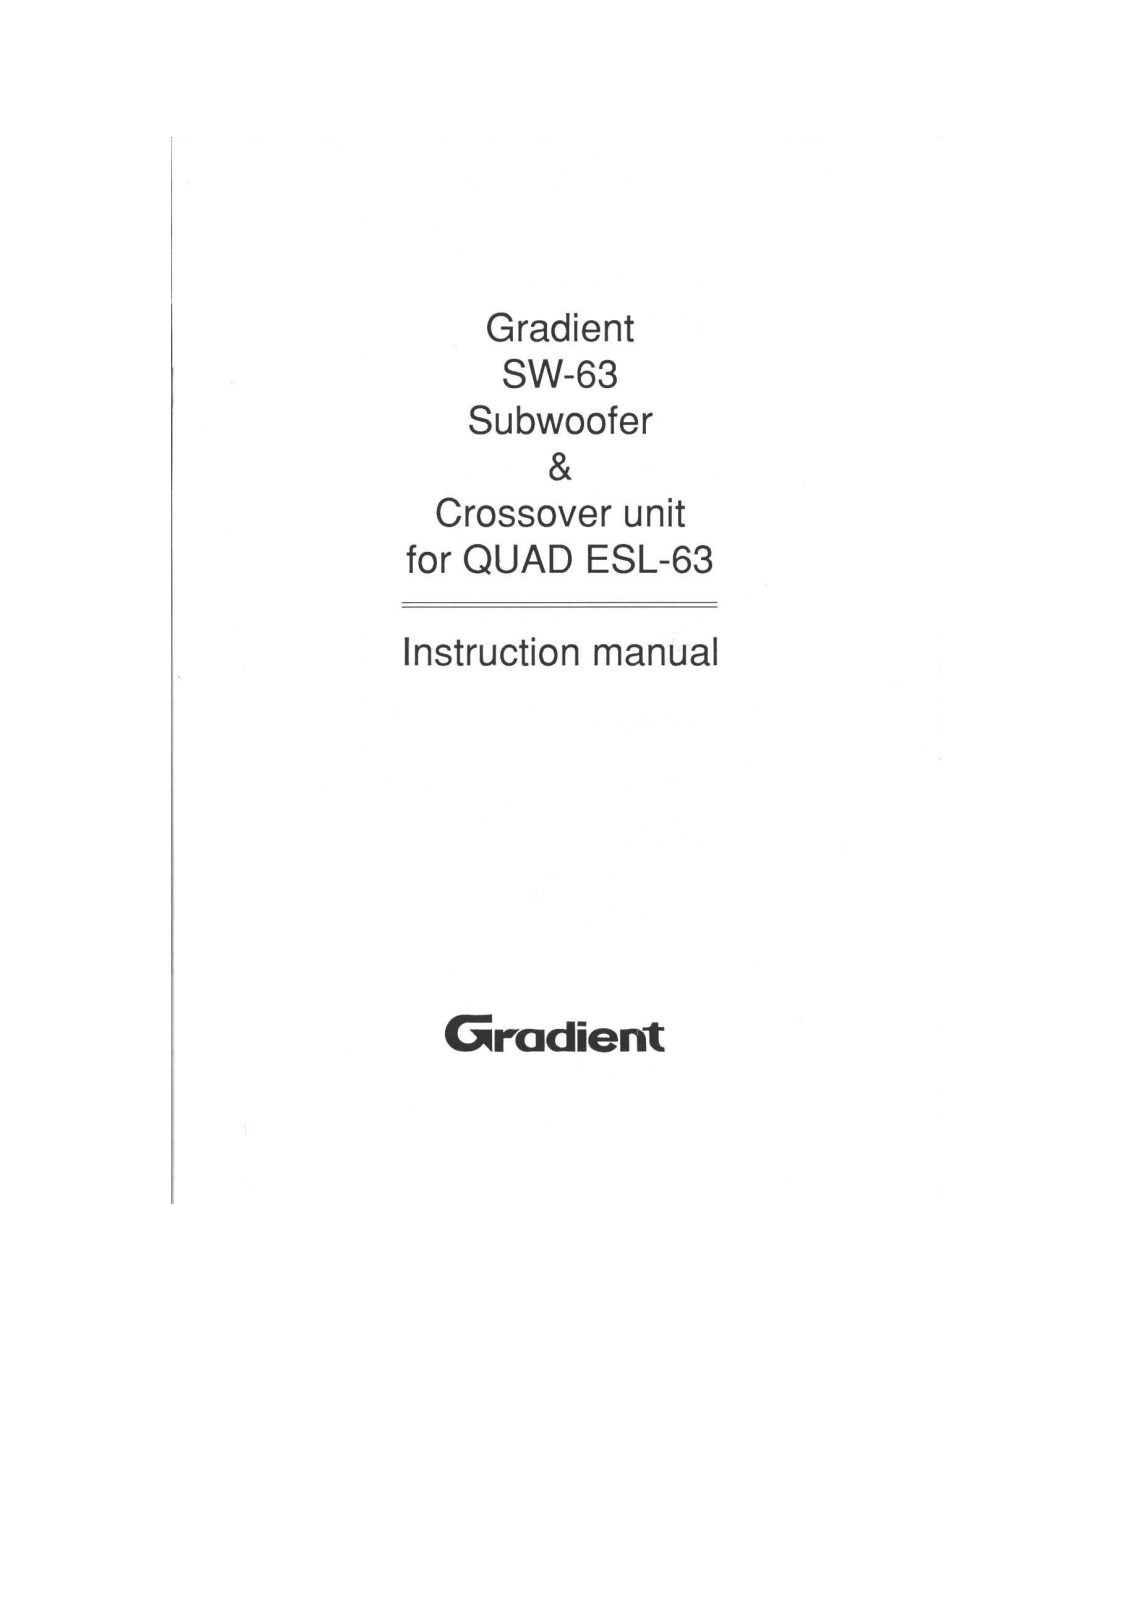 Gradient SW-63 Owners manual